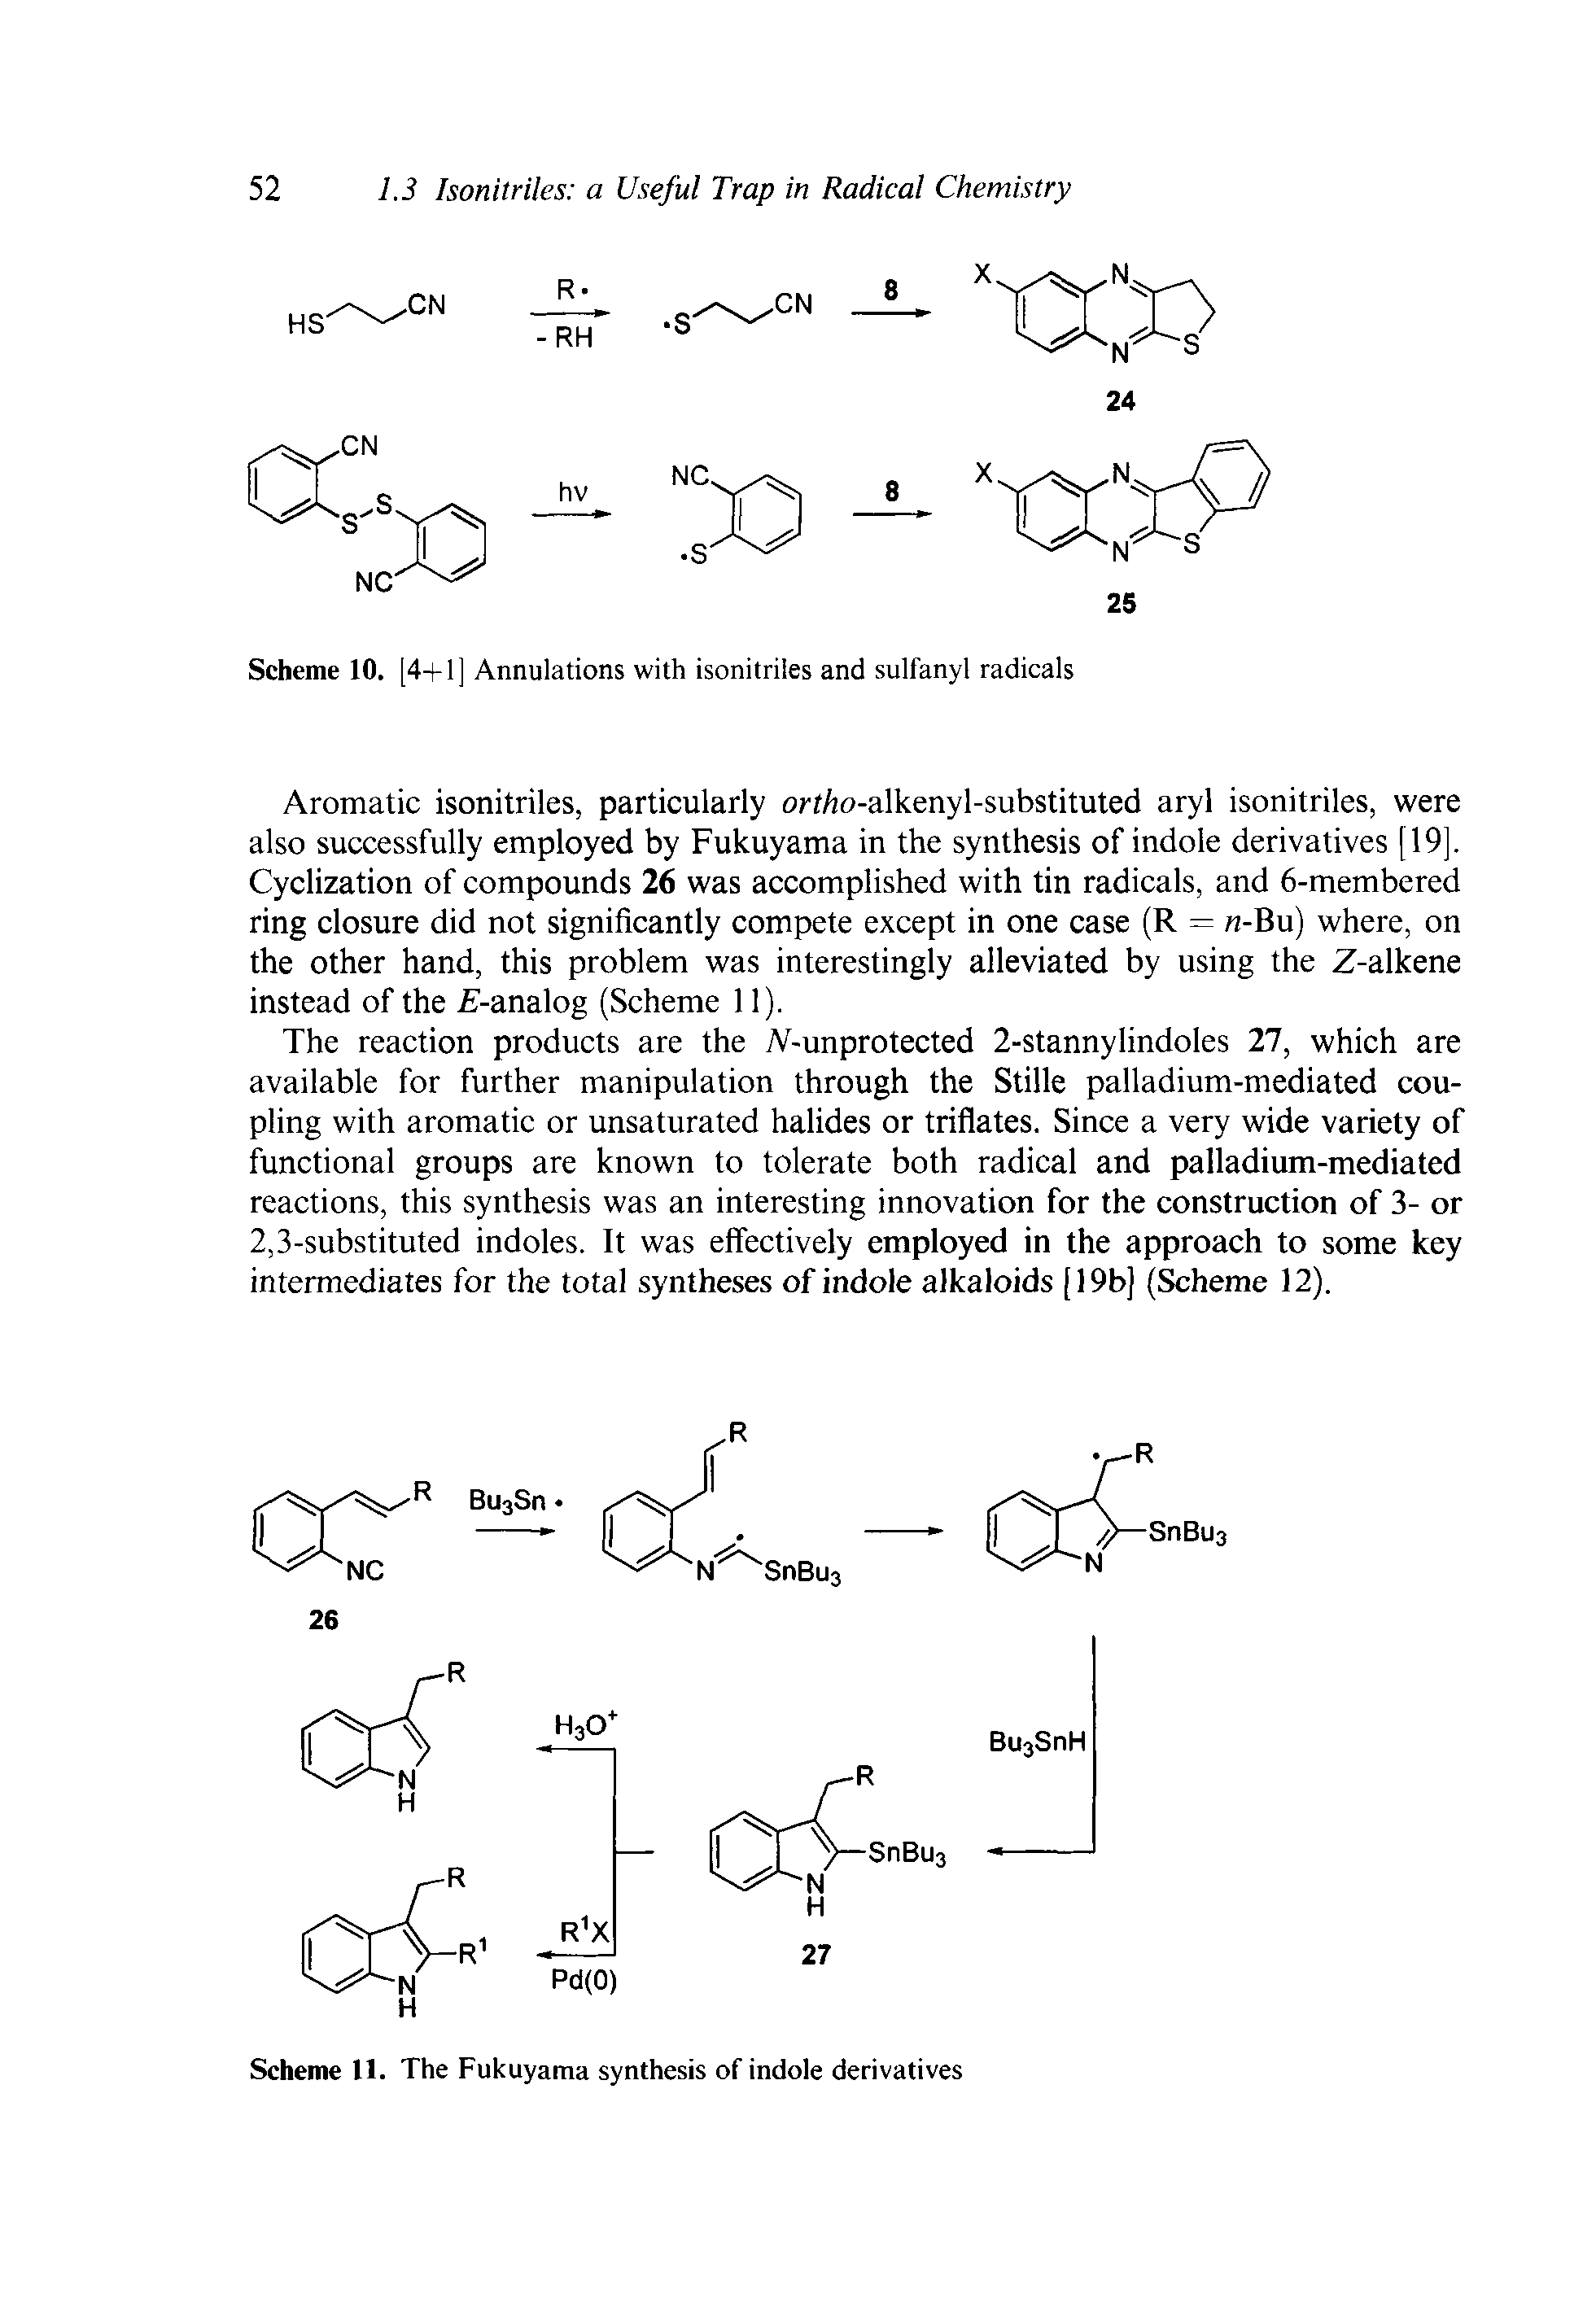 Scheme 10. [4+1] Annulations with isonitriles and sulfanyl radicals...